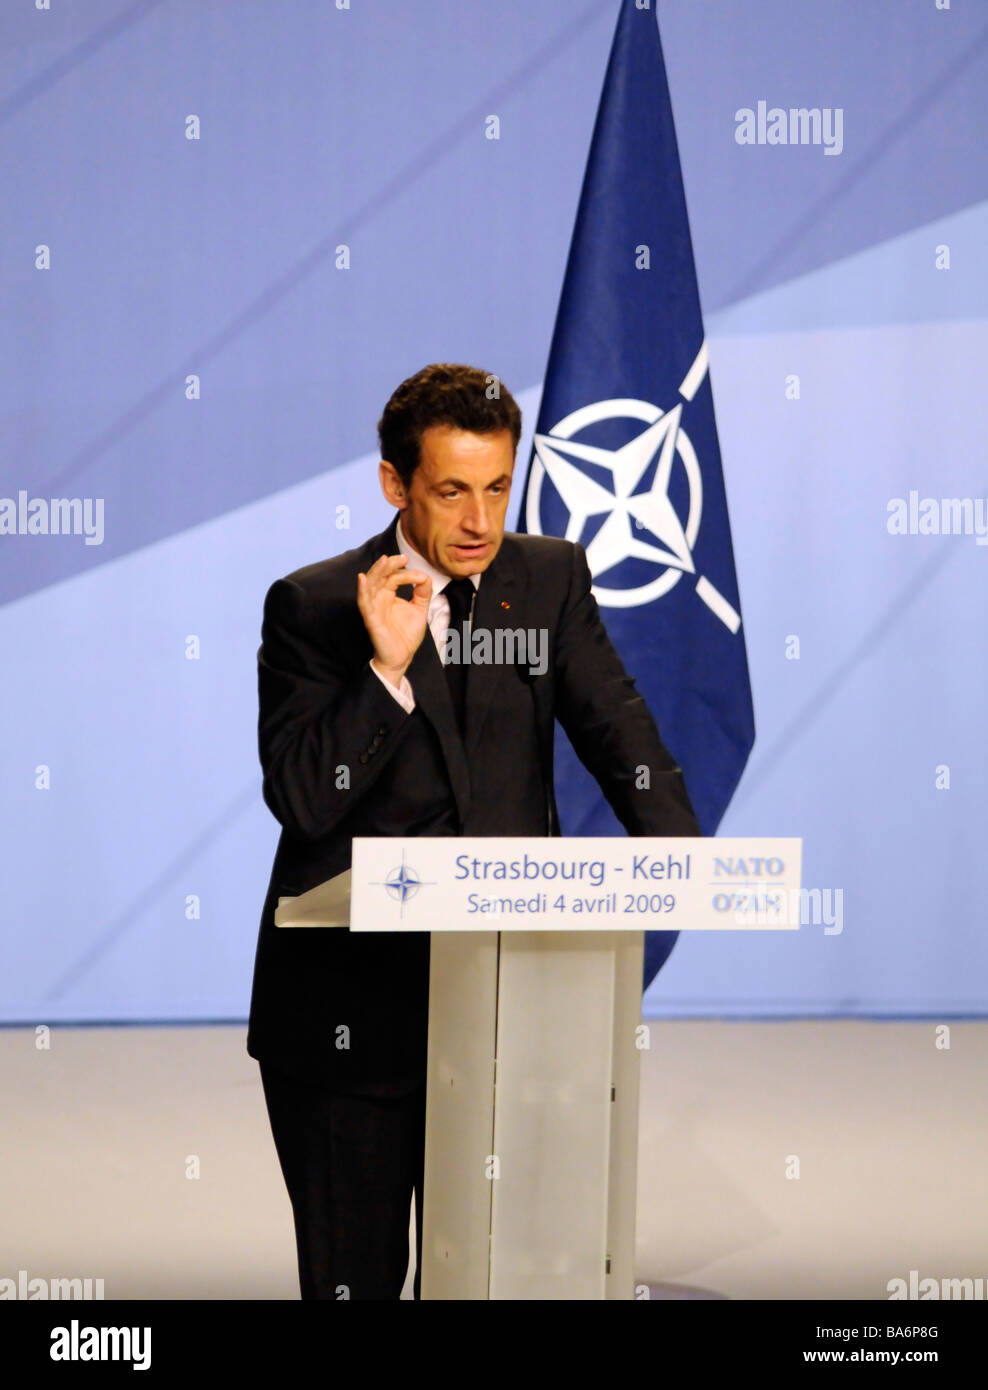 French president Nicolas Sarkozy addressing a press conference during a NATO summit in Strasbourg, France. Stock Photo